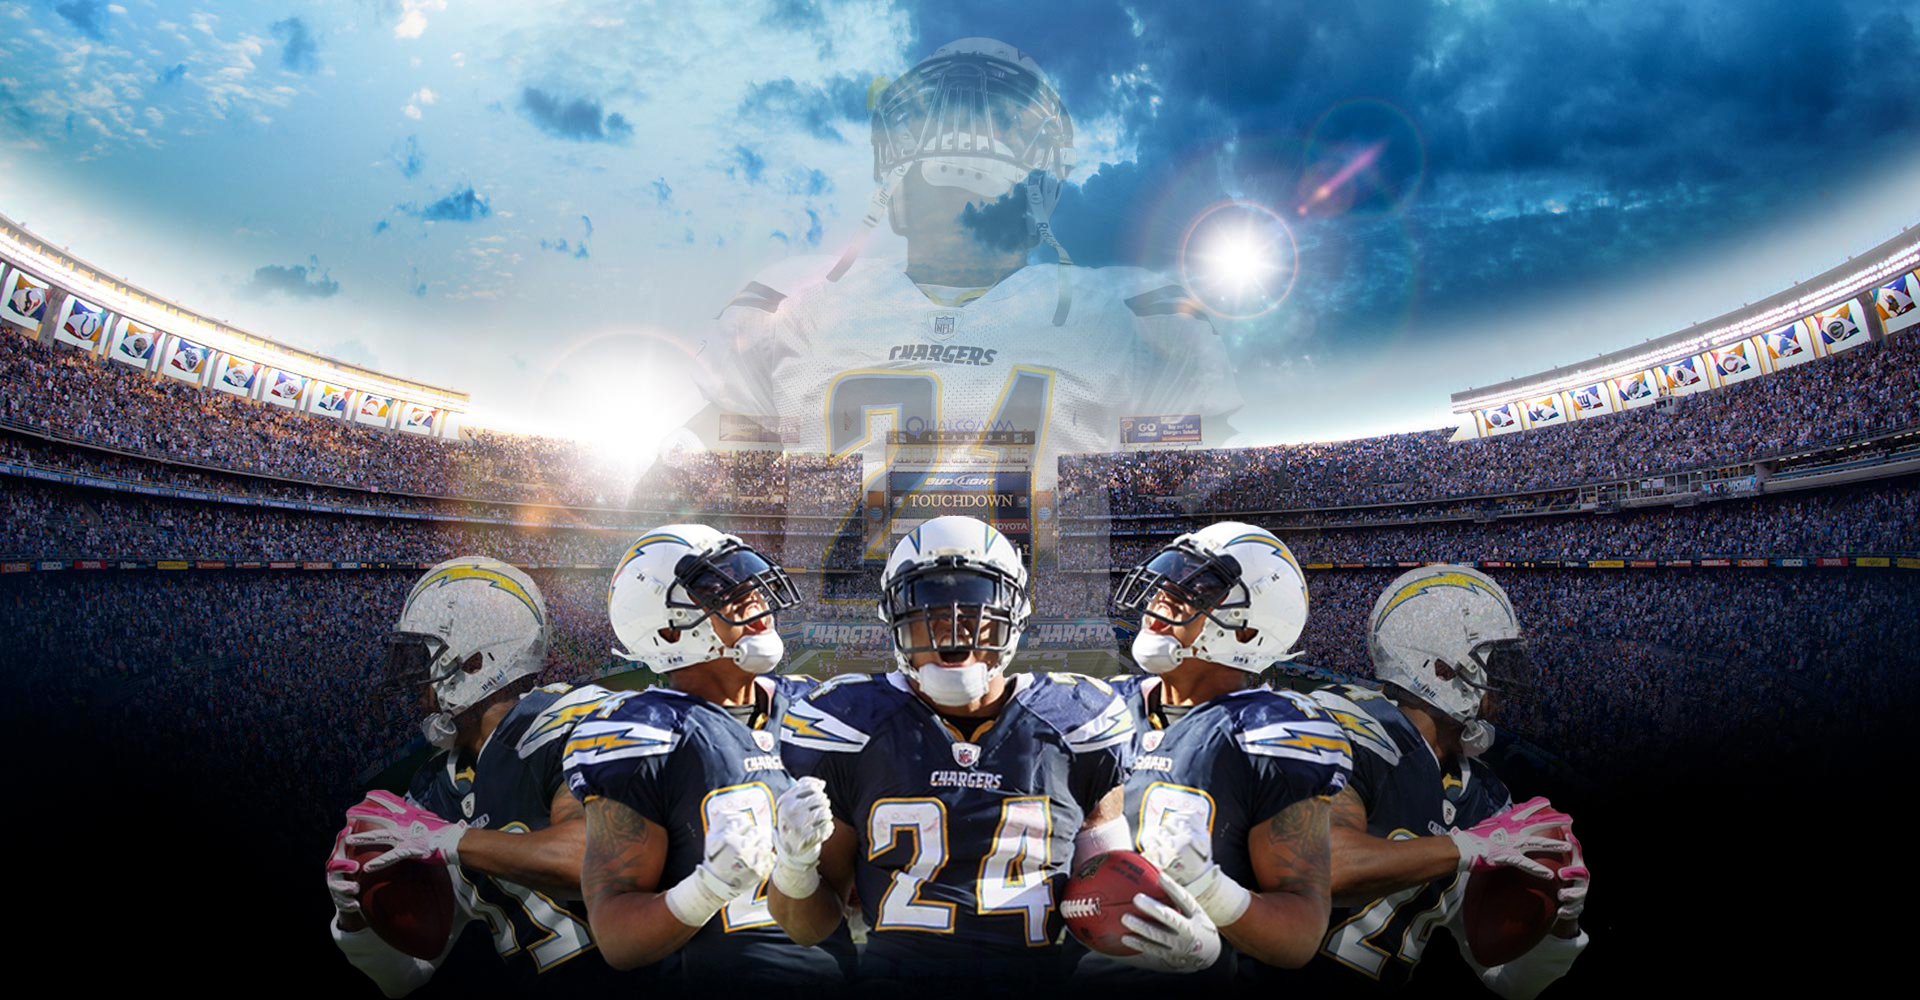 iR4G3s Wallpaper Thread 2014   The Official San Diego Chargers Forum